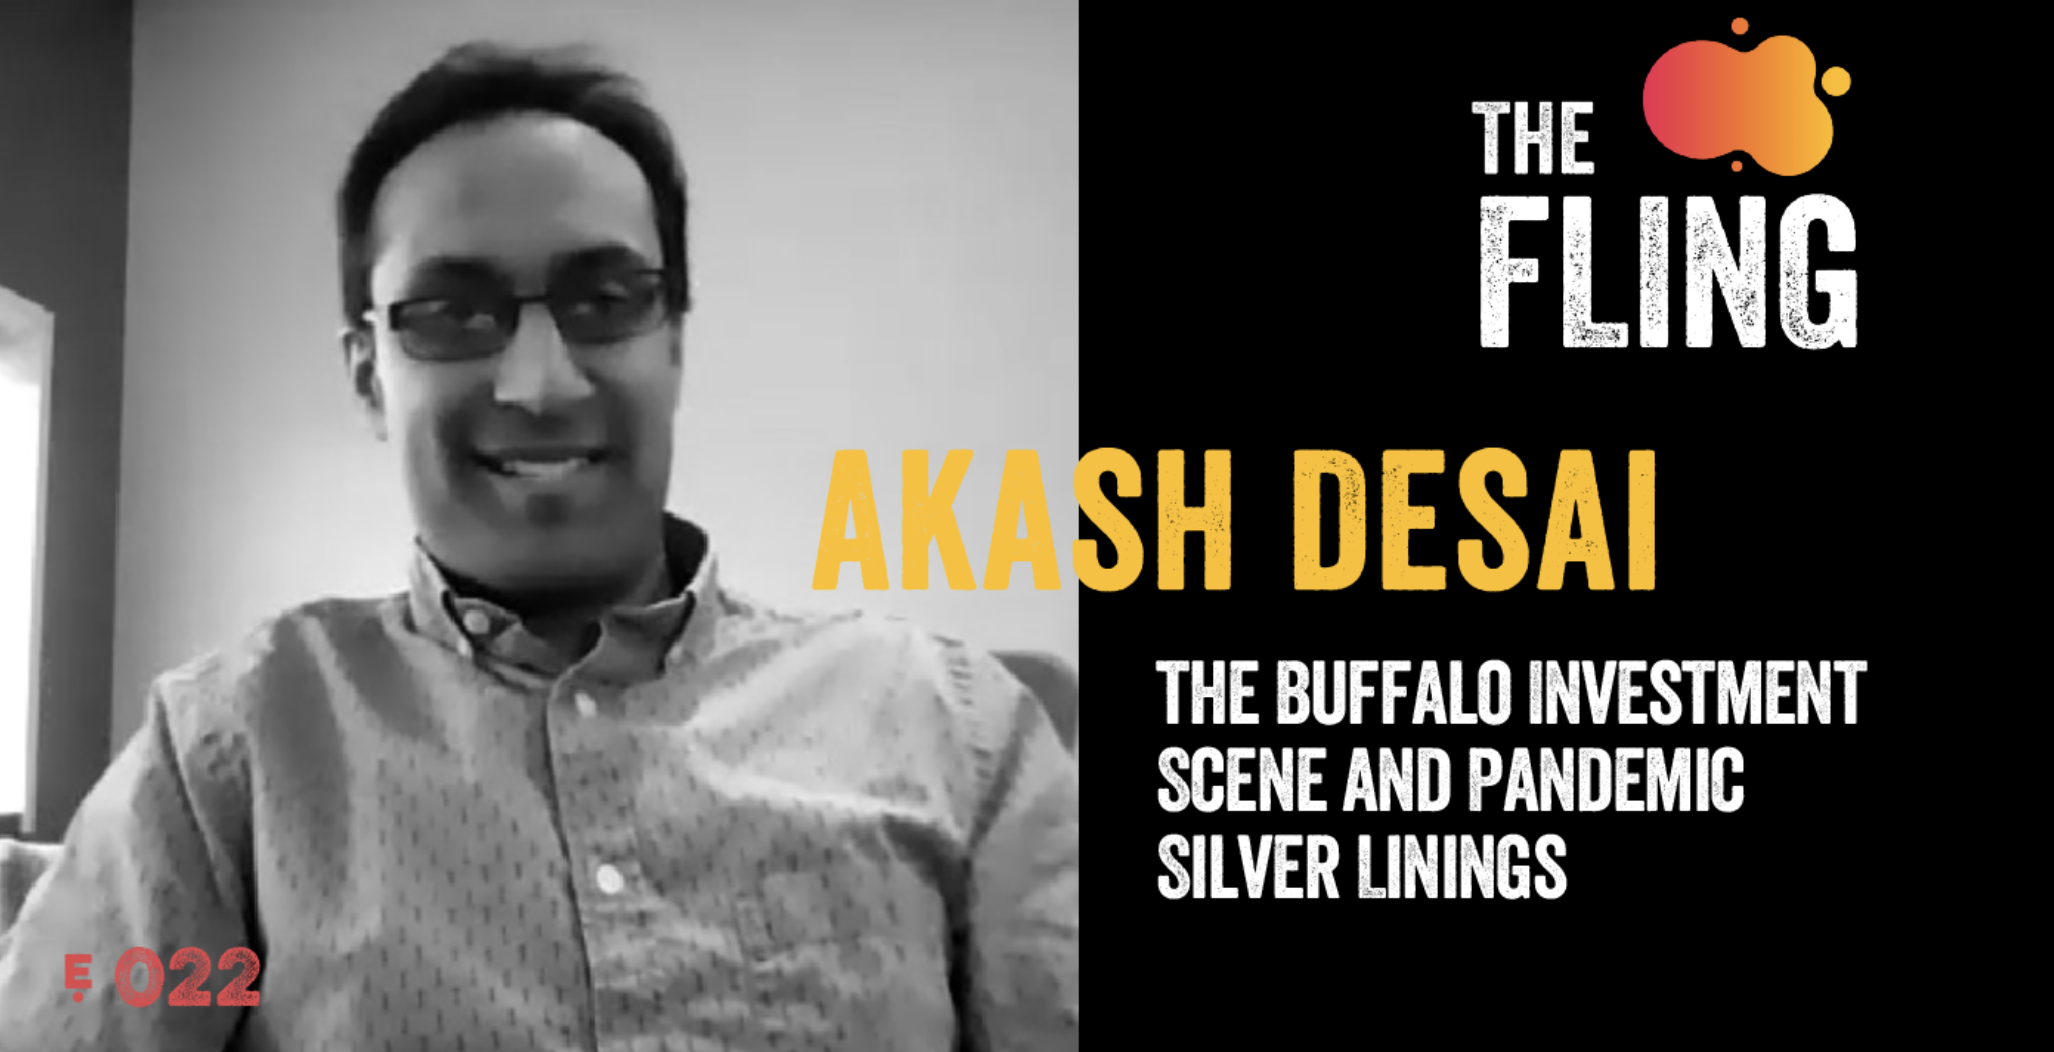 Akash Desai, the Buffalo Investment Scene and Pandemic Silver Linings